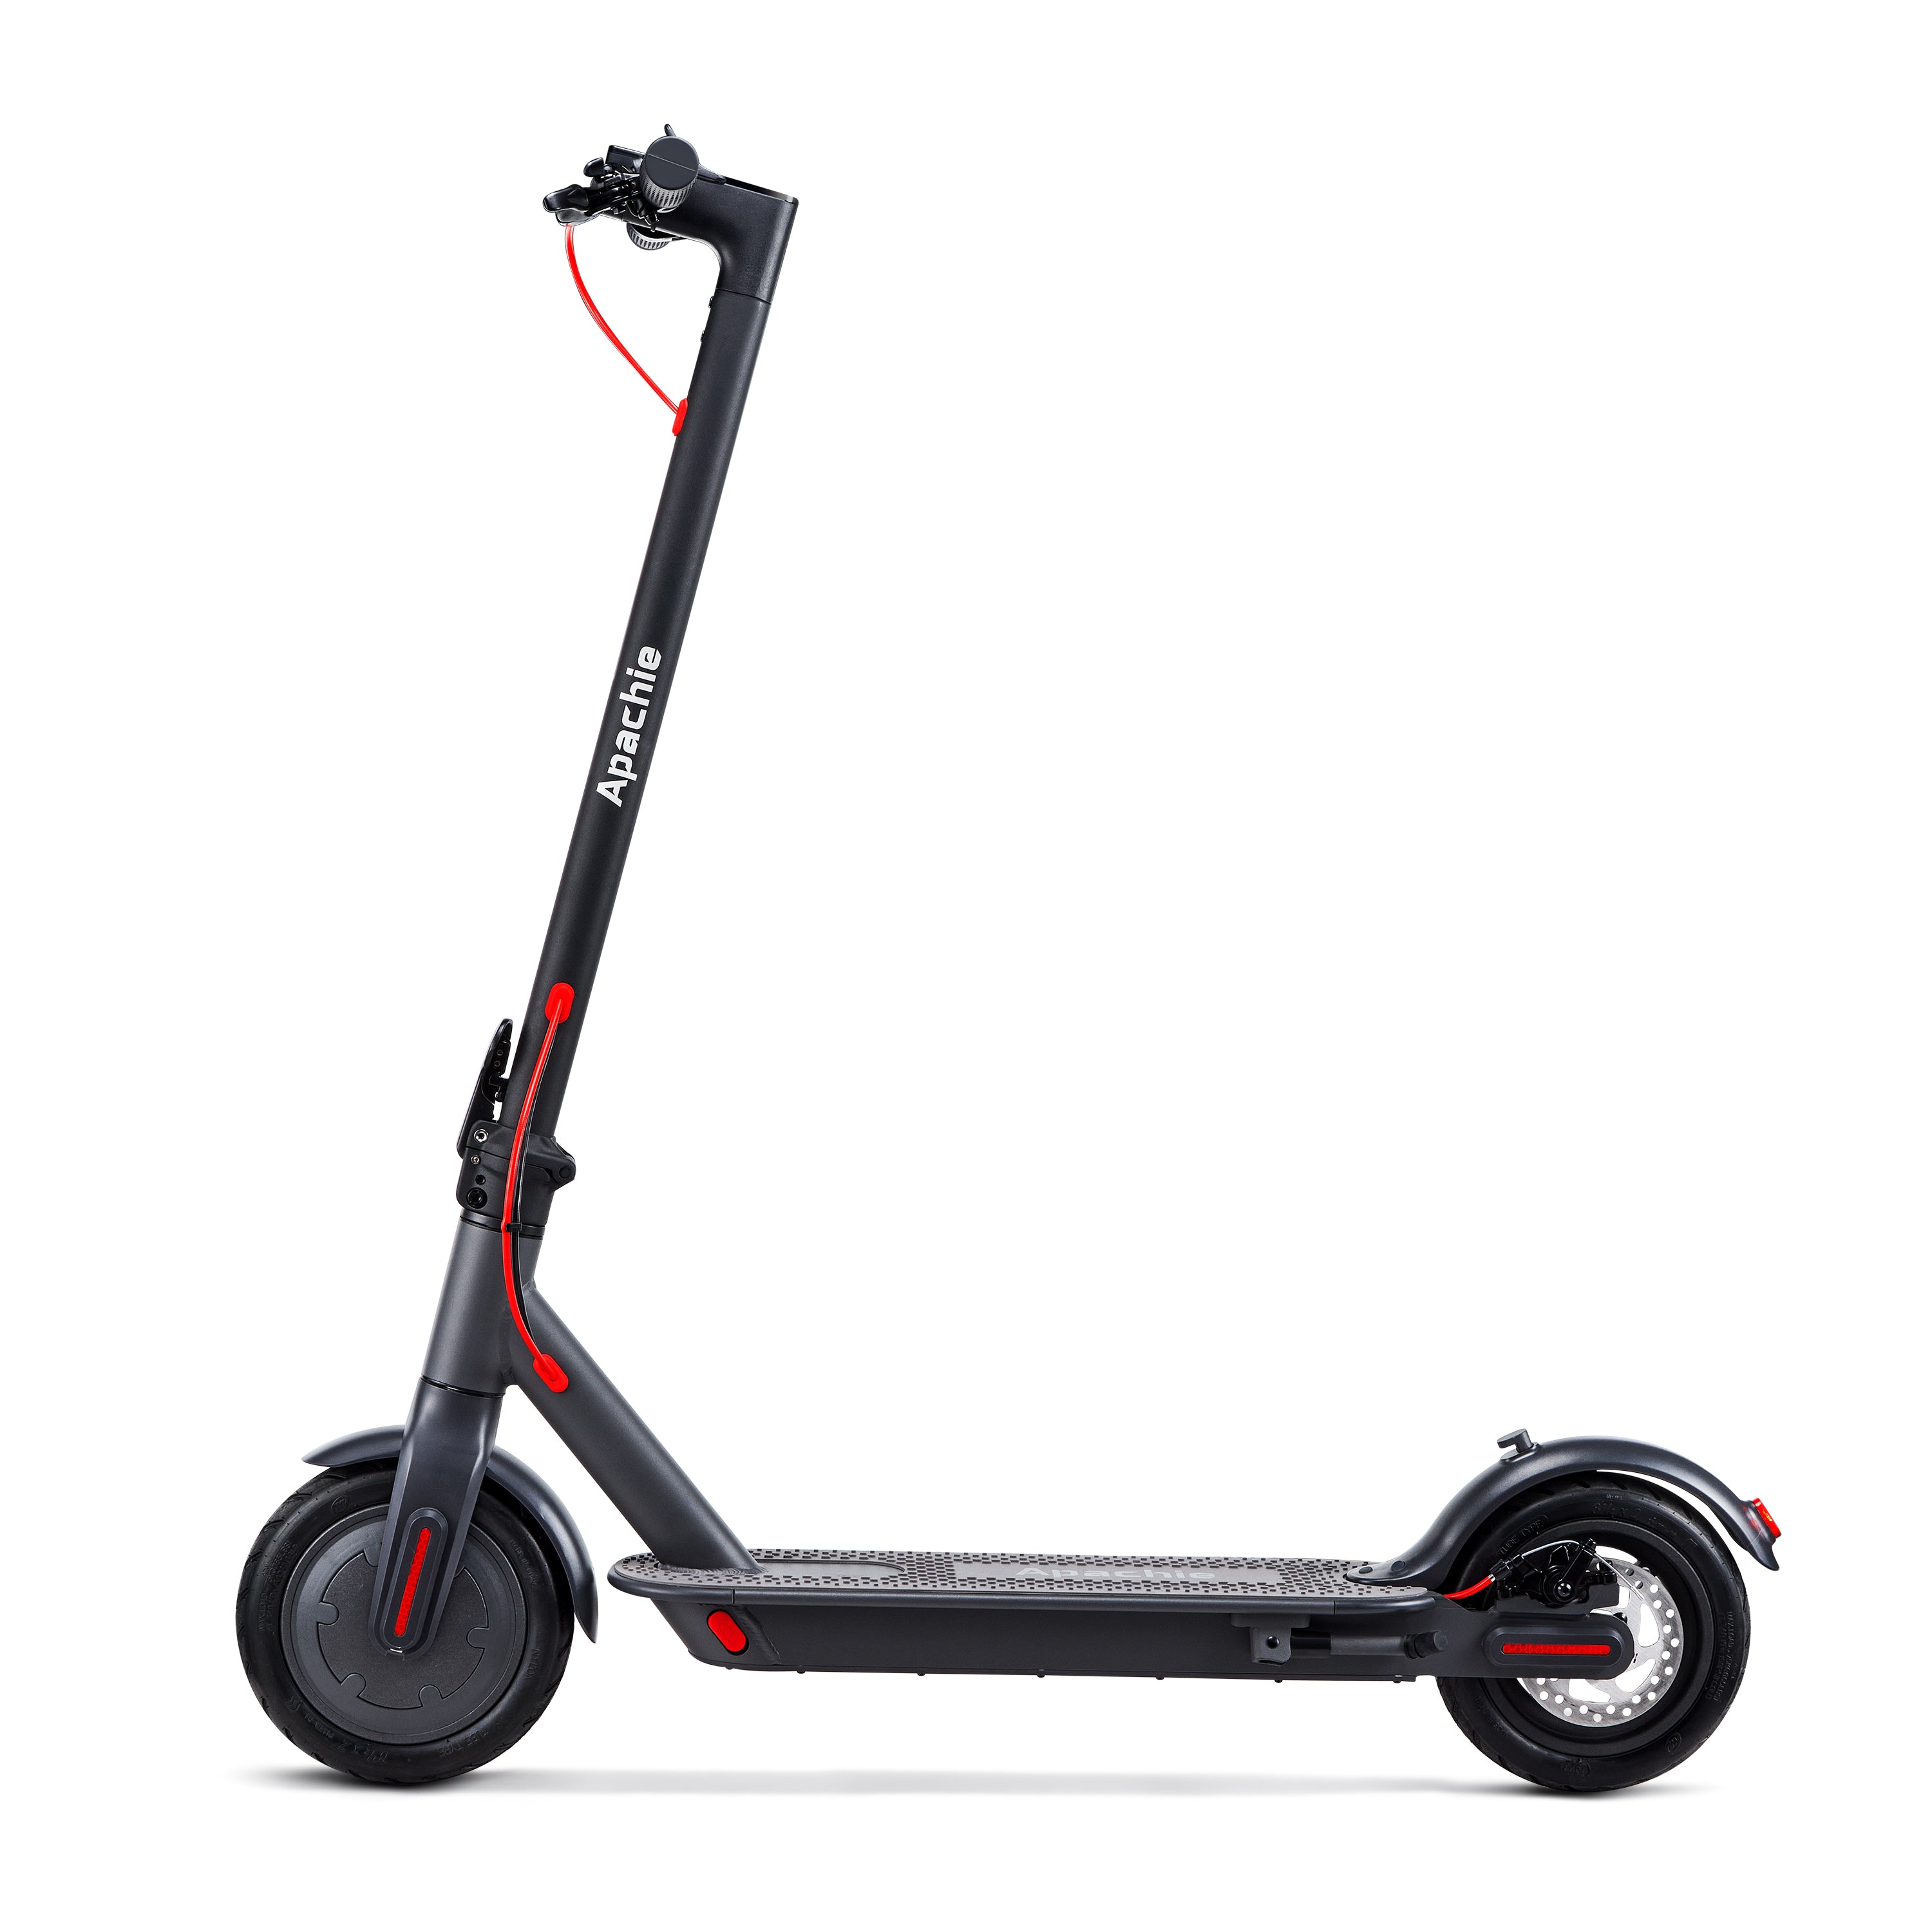 Apachie M4 350W Electric Scooter